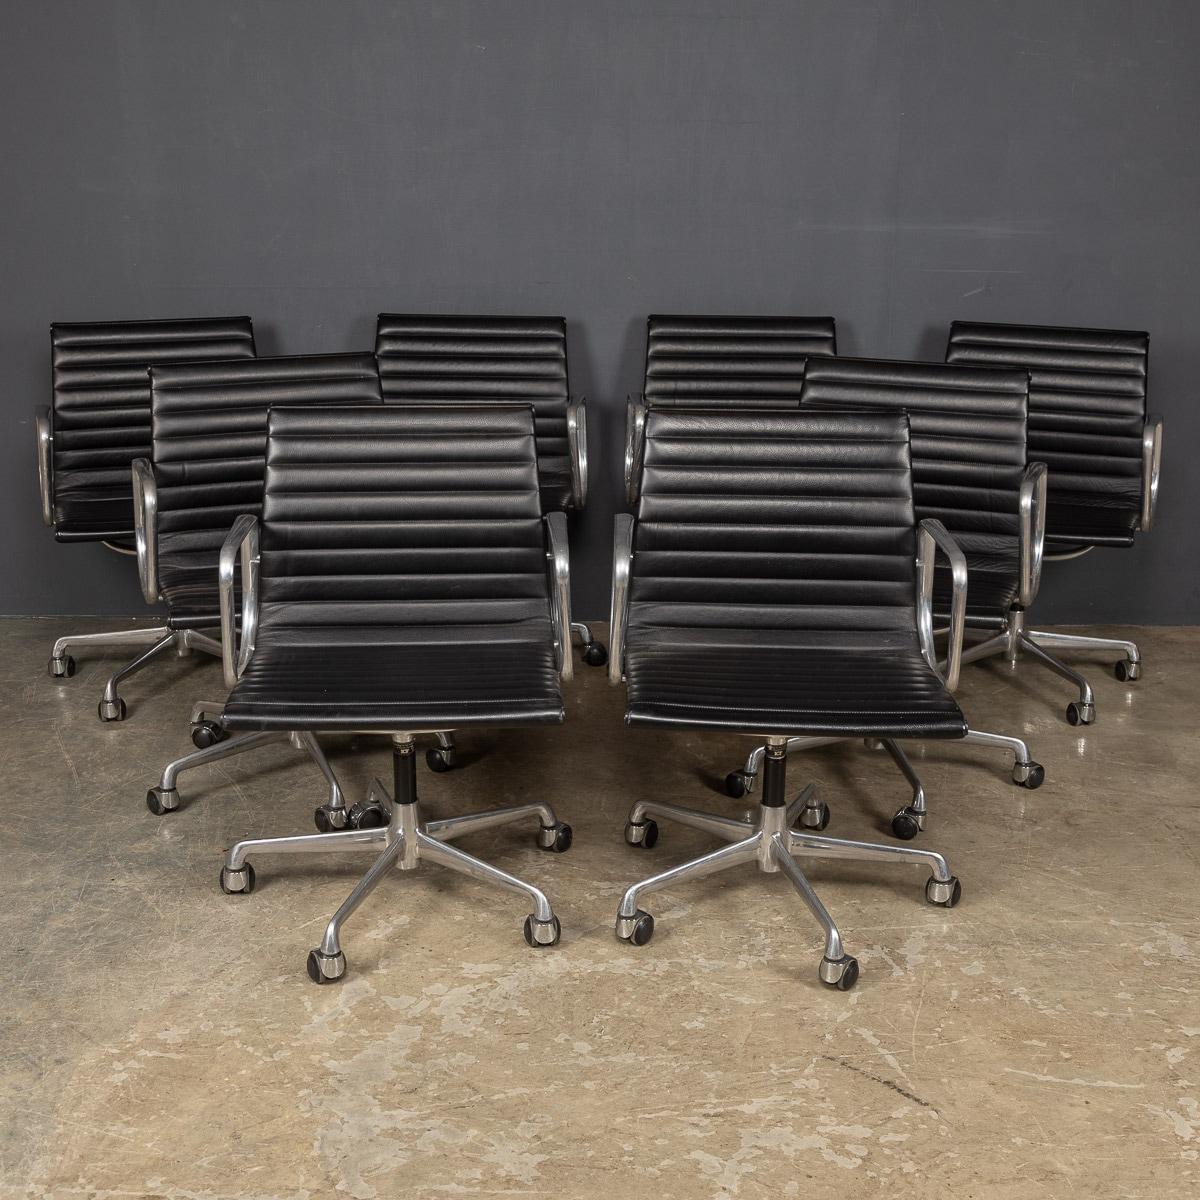 A set of eight leather and polished aluminium swivel chairs, known as the group management chairs, created by Charles and Ray Eames for Herman Miller. Originally designed for the modern 1950’s office these chairs have manual height adjustment and